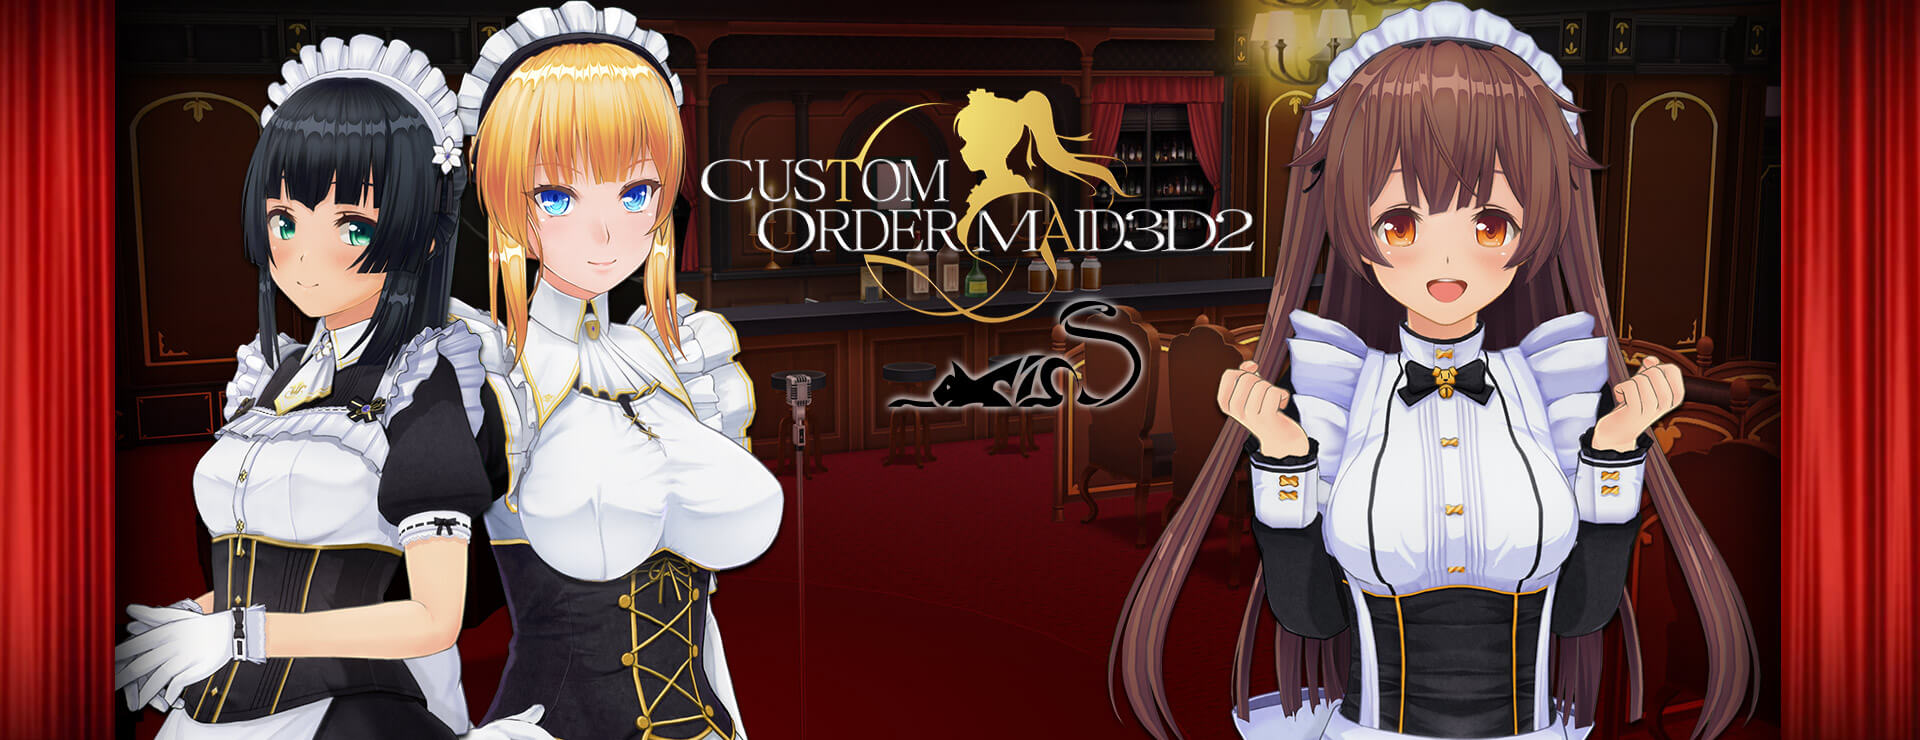 Custom Order Maid 3D 2: Happy New Year Lucky Bag 2024 type Adult - Simulación Juego